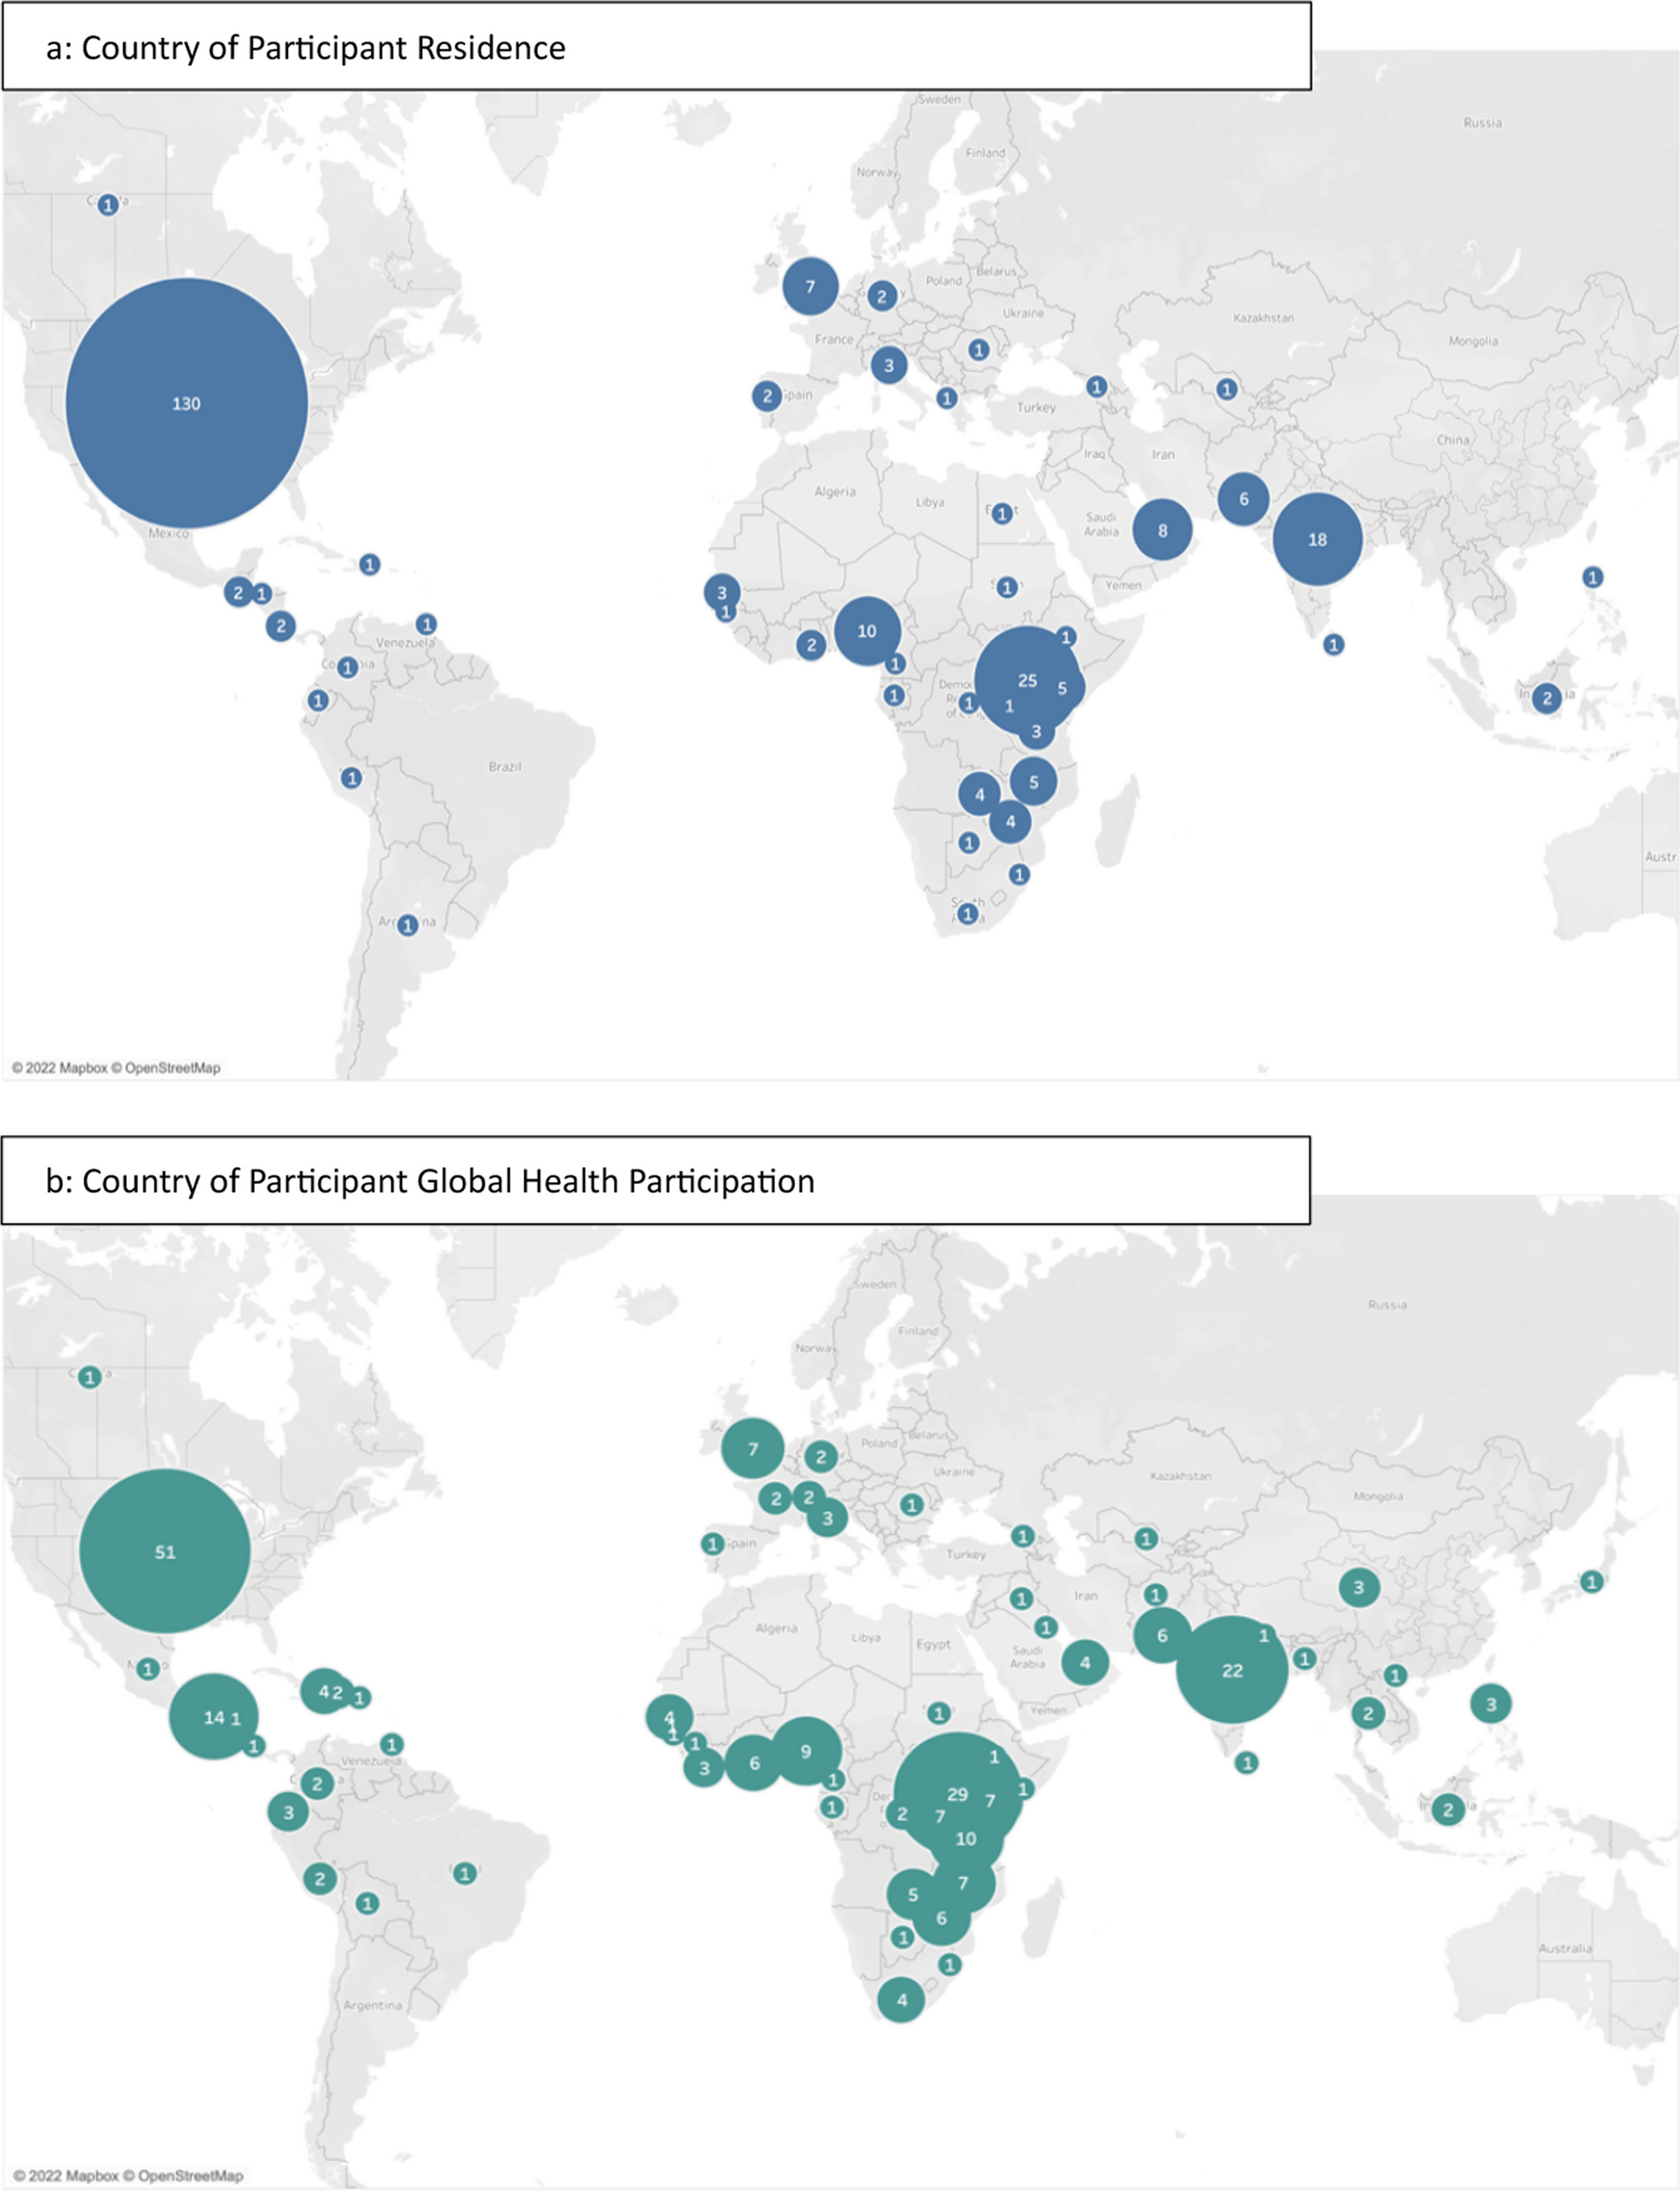 Access, interest and equity considerations for virtual global health activities during the COVID-19 pandemic: a cross-sectional study